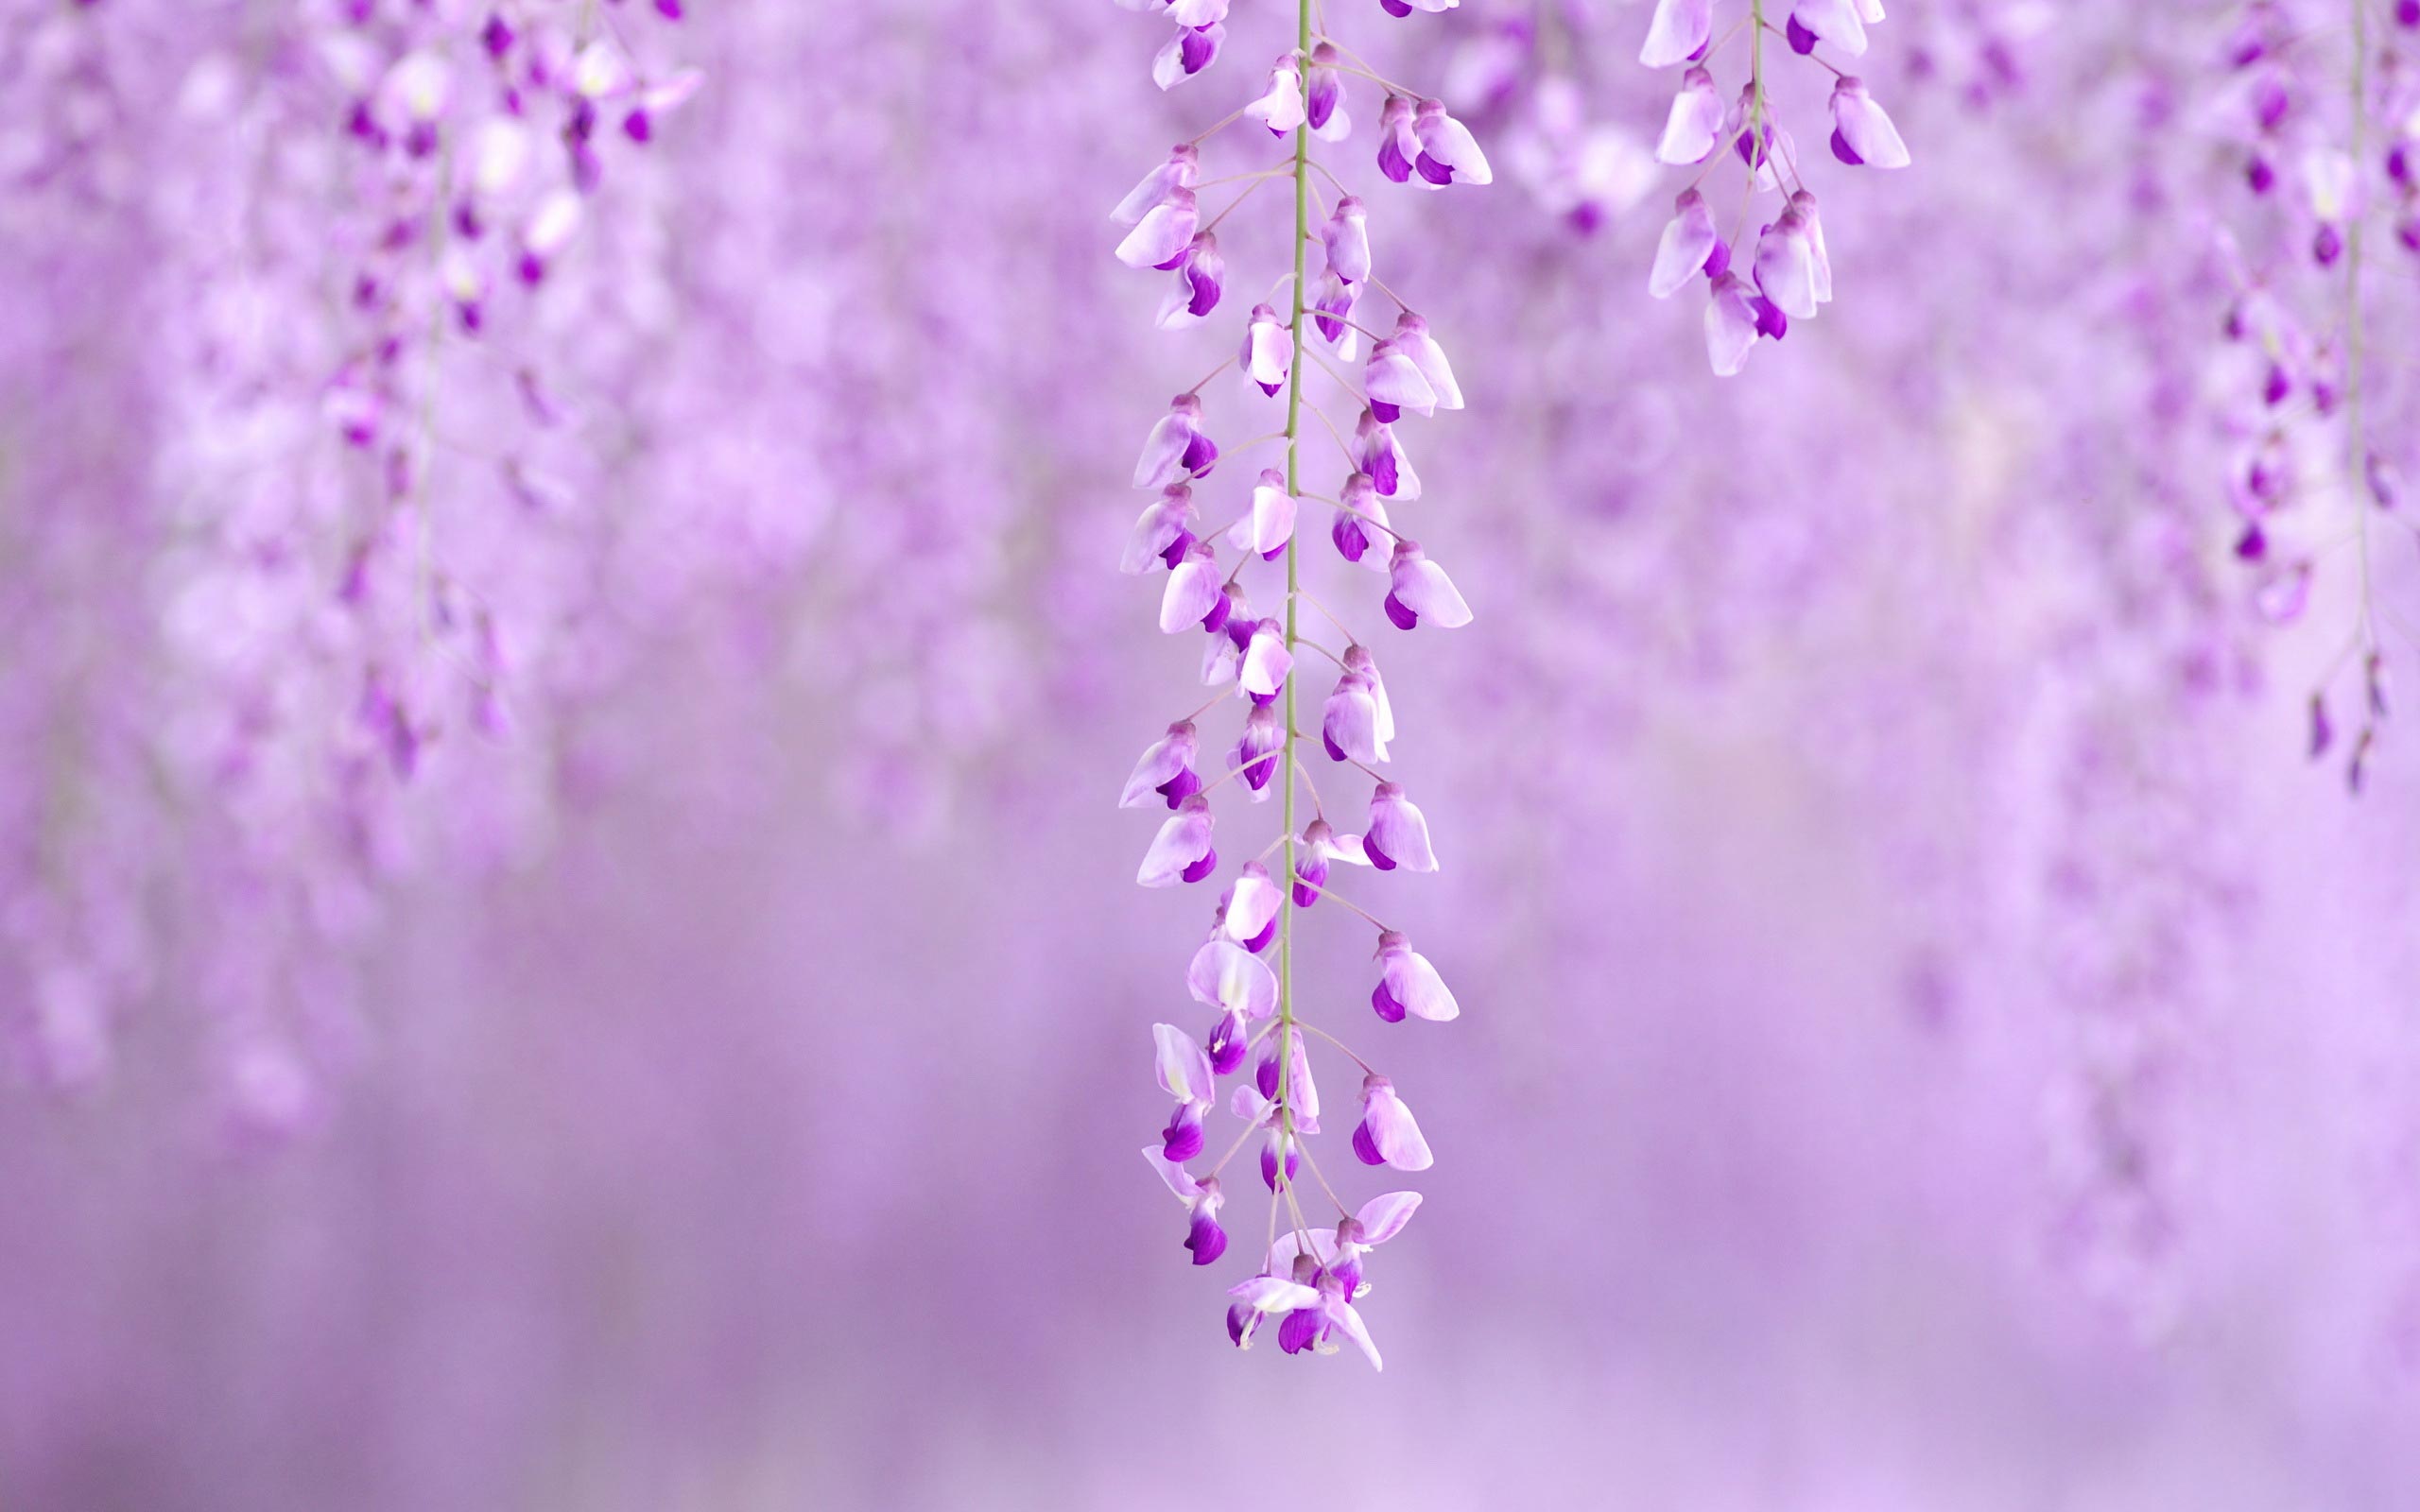 Gallery for - purple spring flowers wallpaper